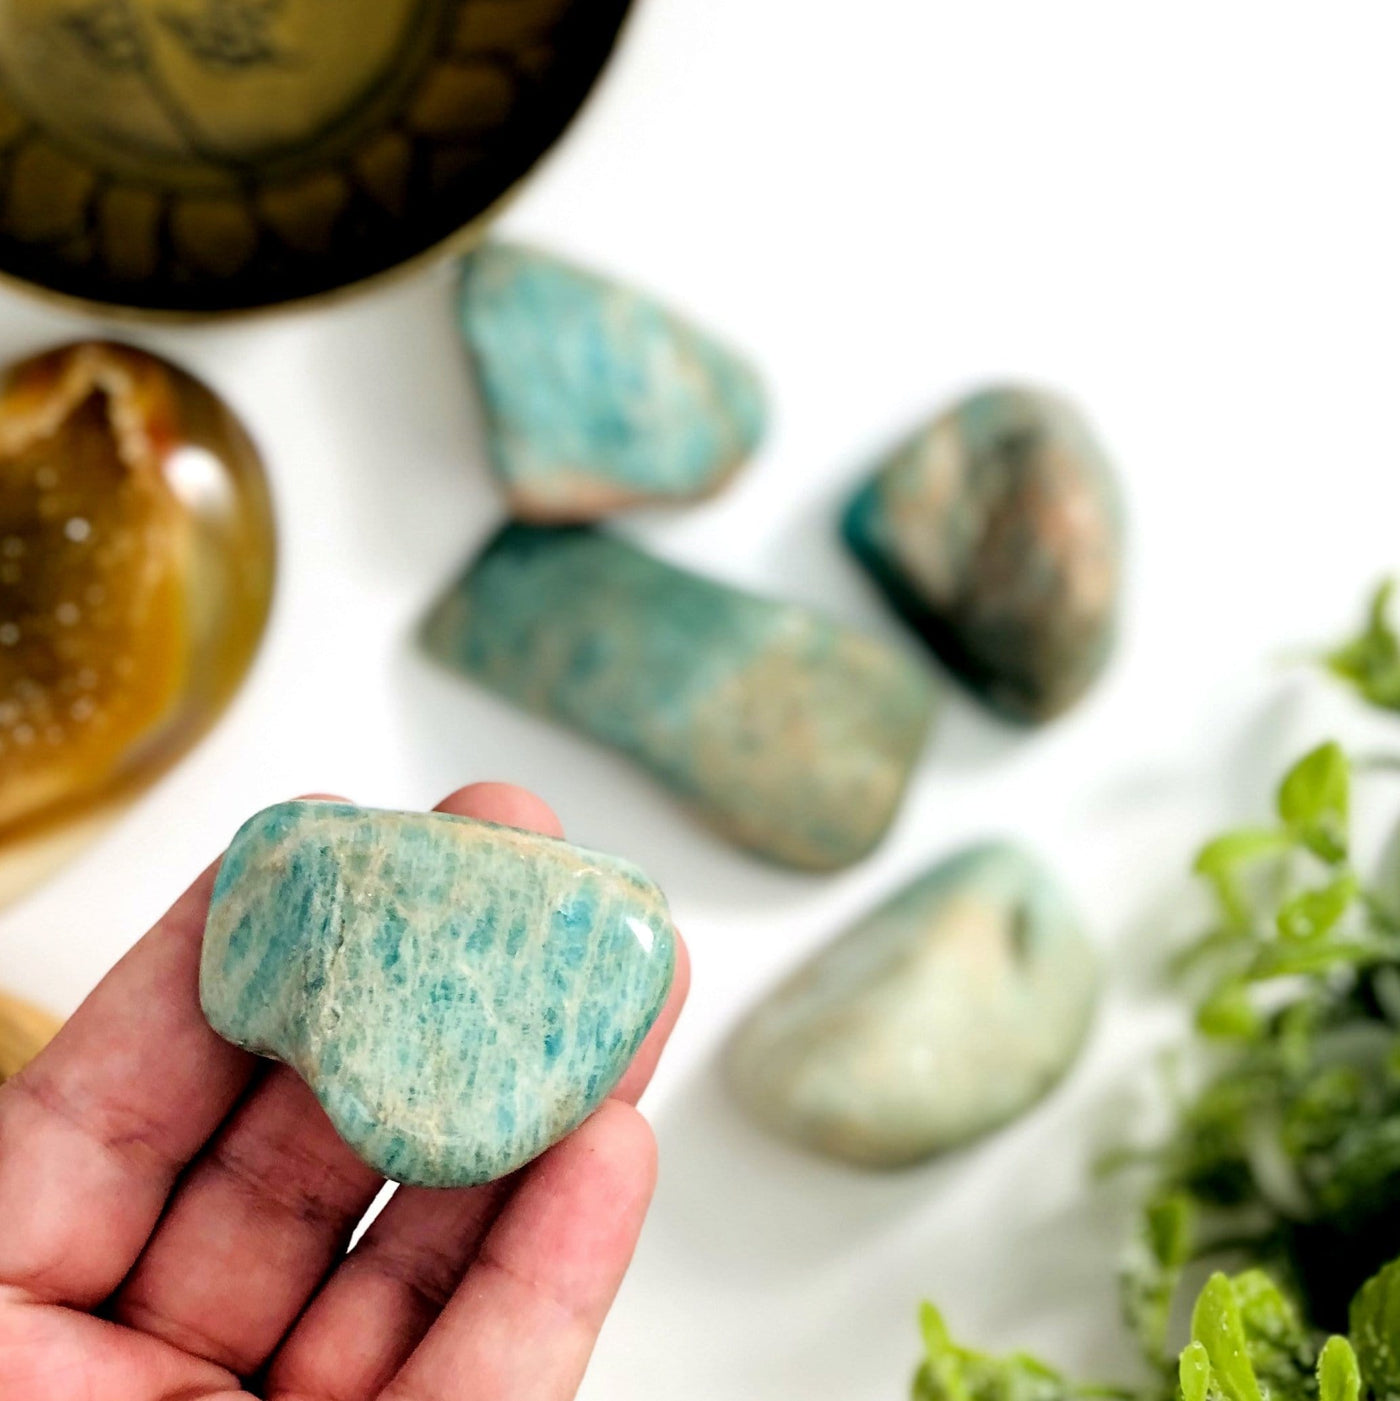 amazonite tumbled stone being held, for size reference.